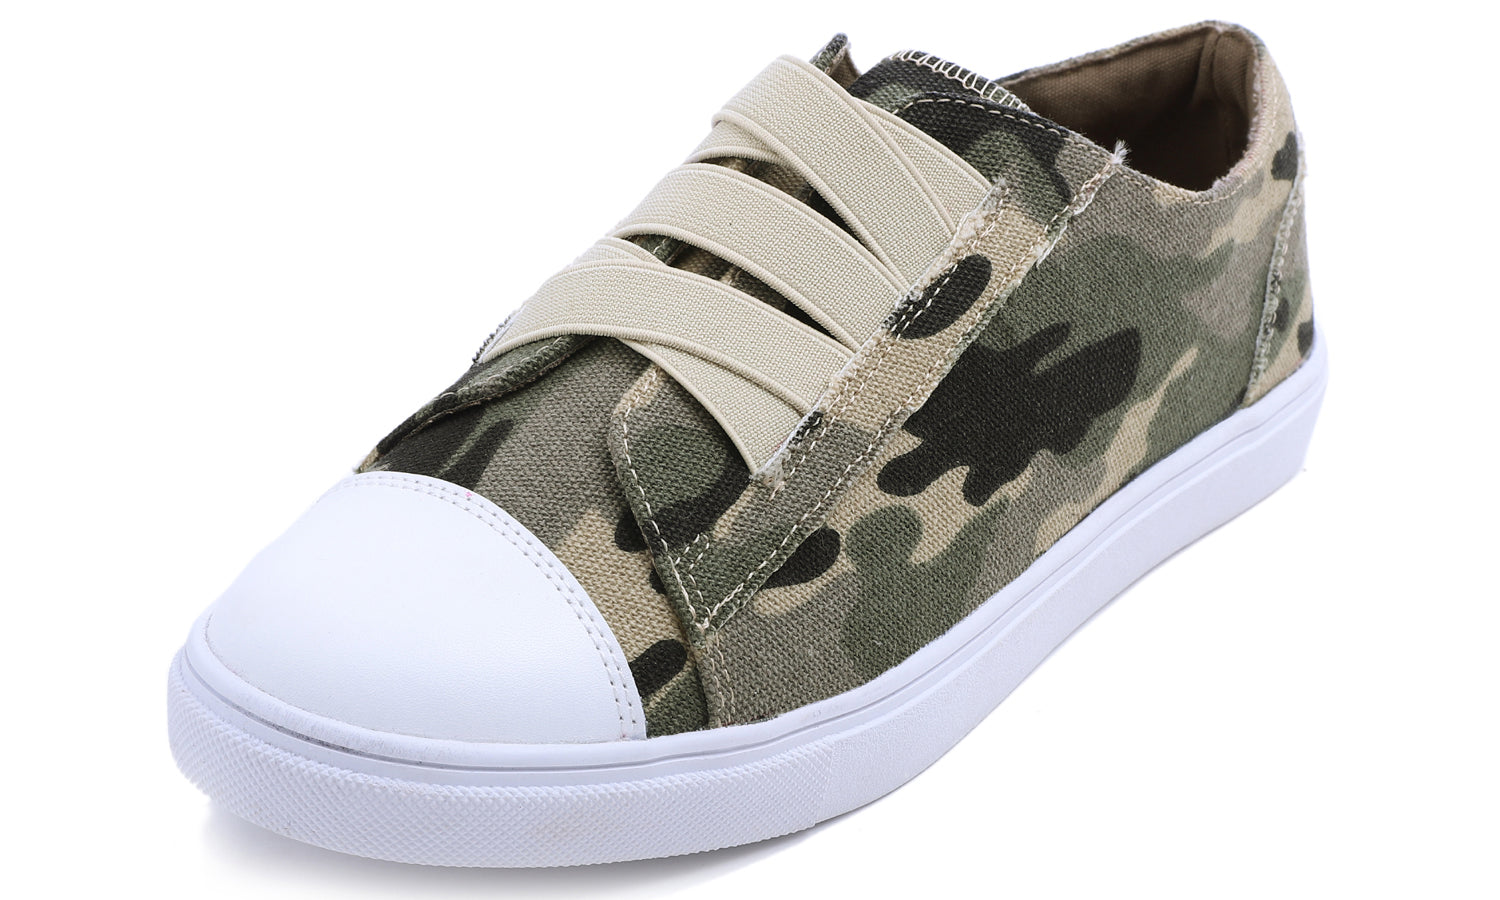 Feversole Women's Casual Slip On Sneaker Comfort Cupsole Loafer Flats Fashion Canvas Easy Elastic Low Top Camouflage